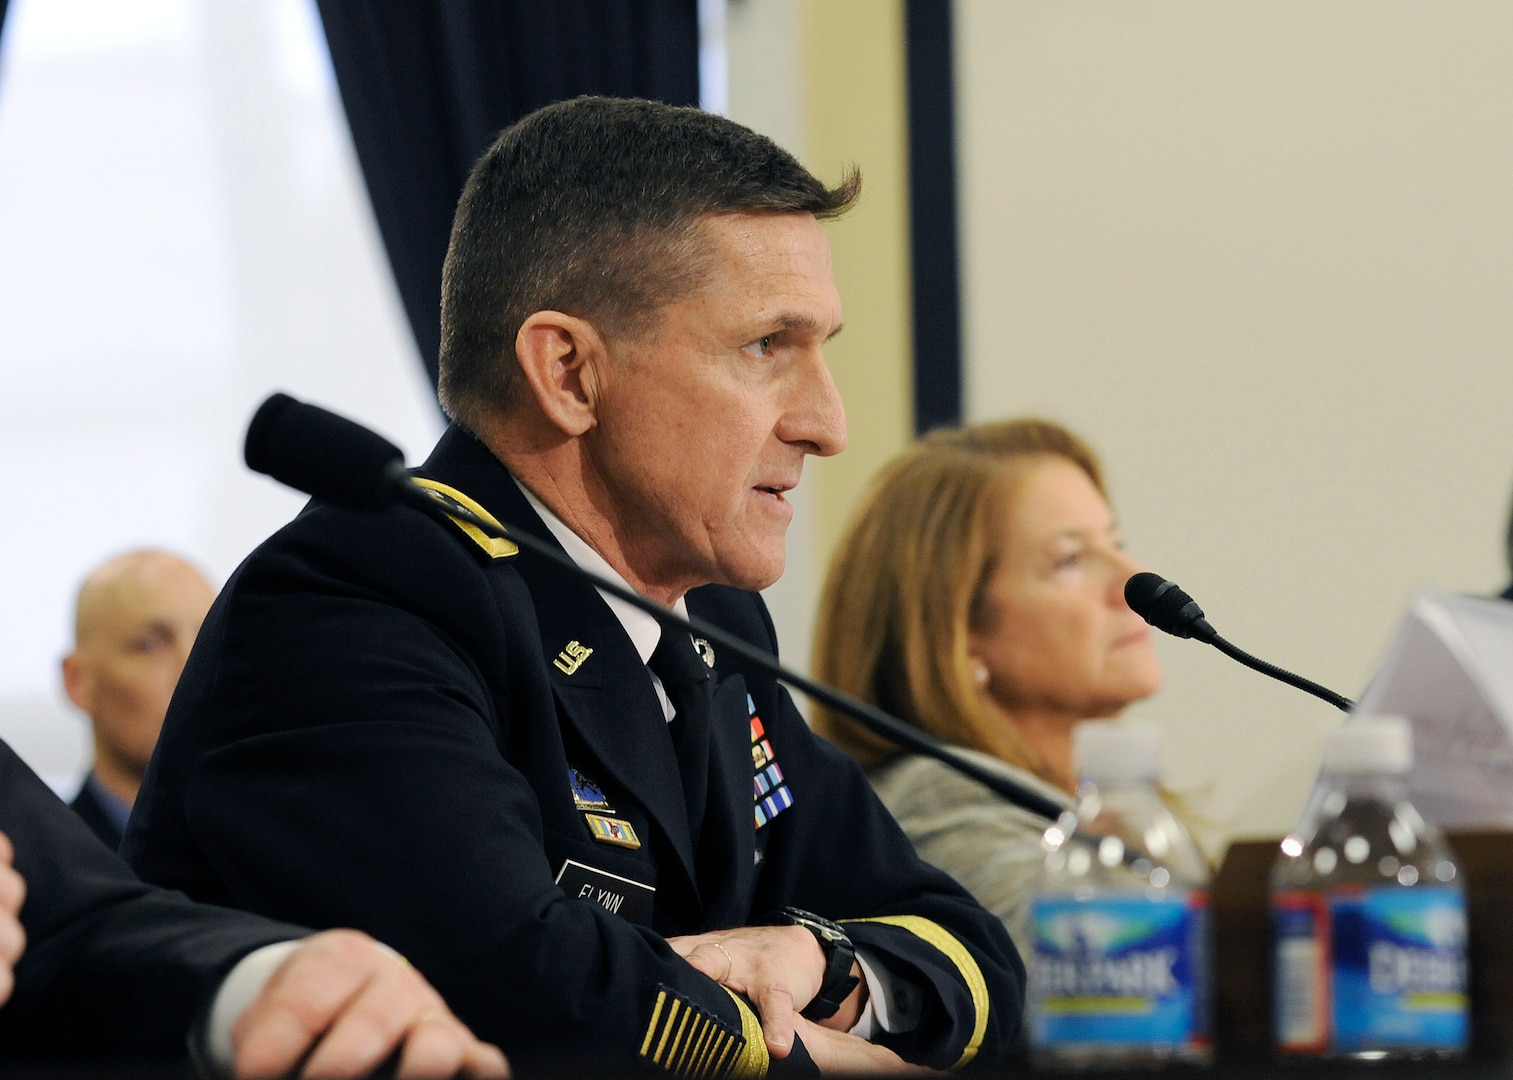 DIA Director Lt. Gen. Michael Flynn testifies before the House Armed Services Sub-Committee on Intelligence, Emerging Threats and Capabilities.